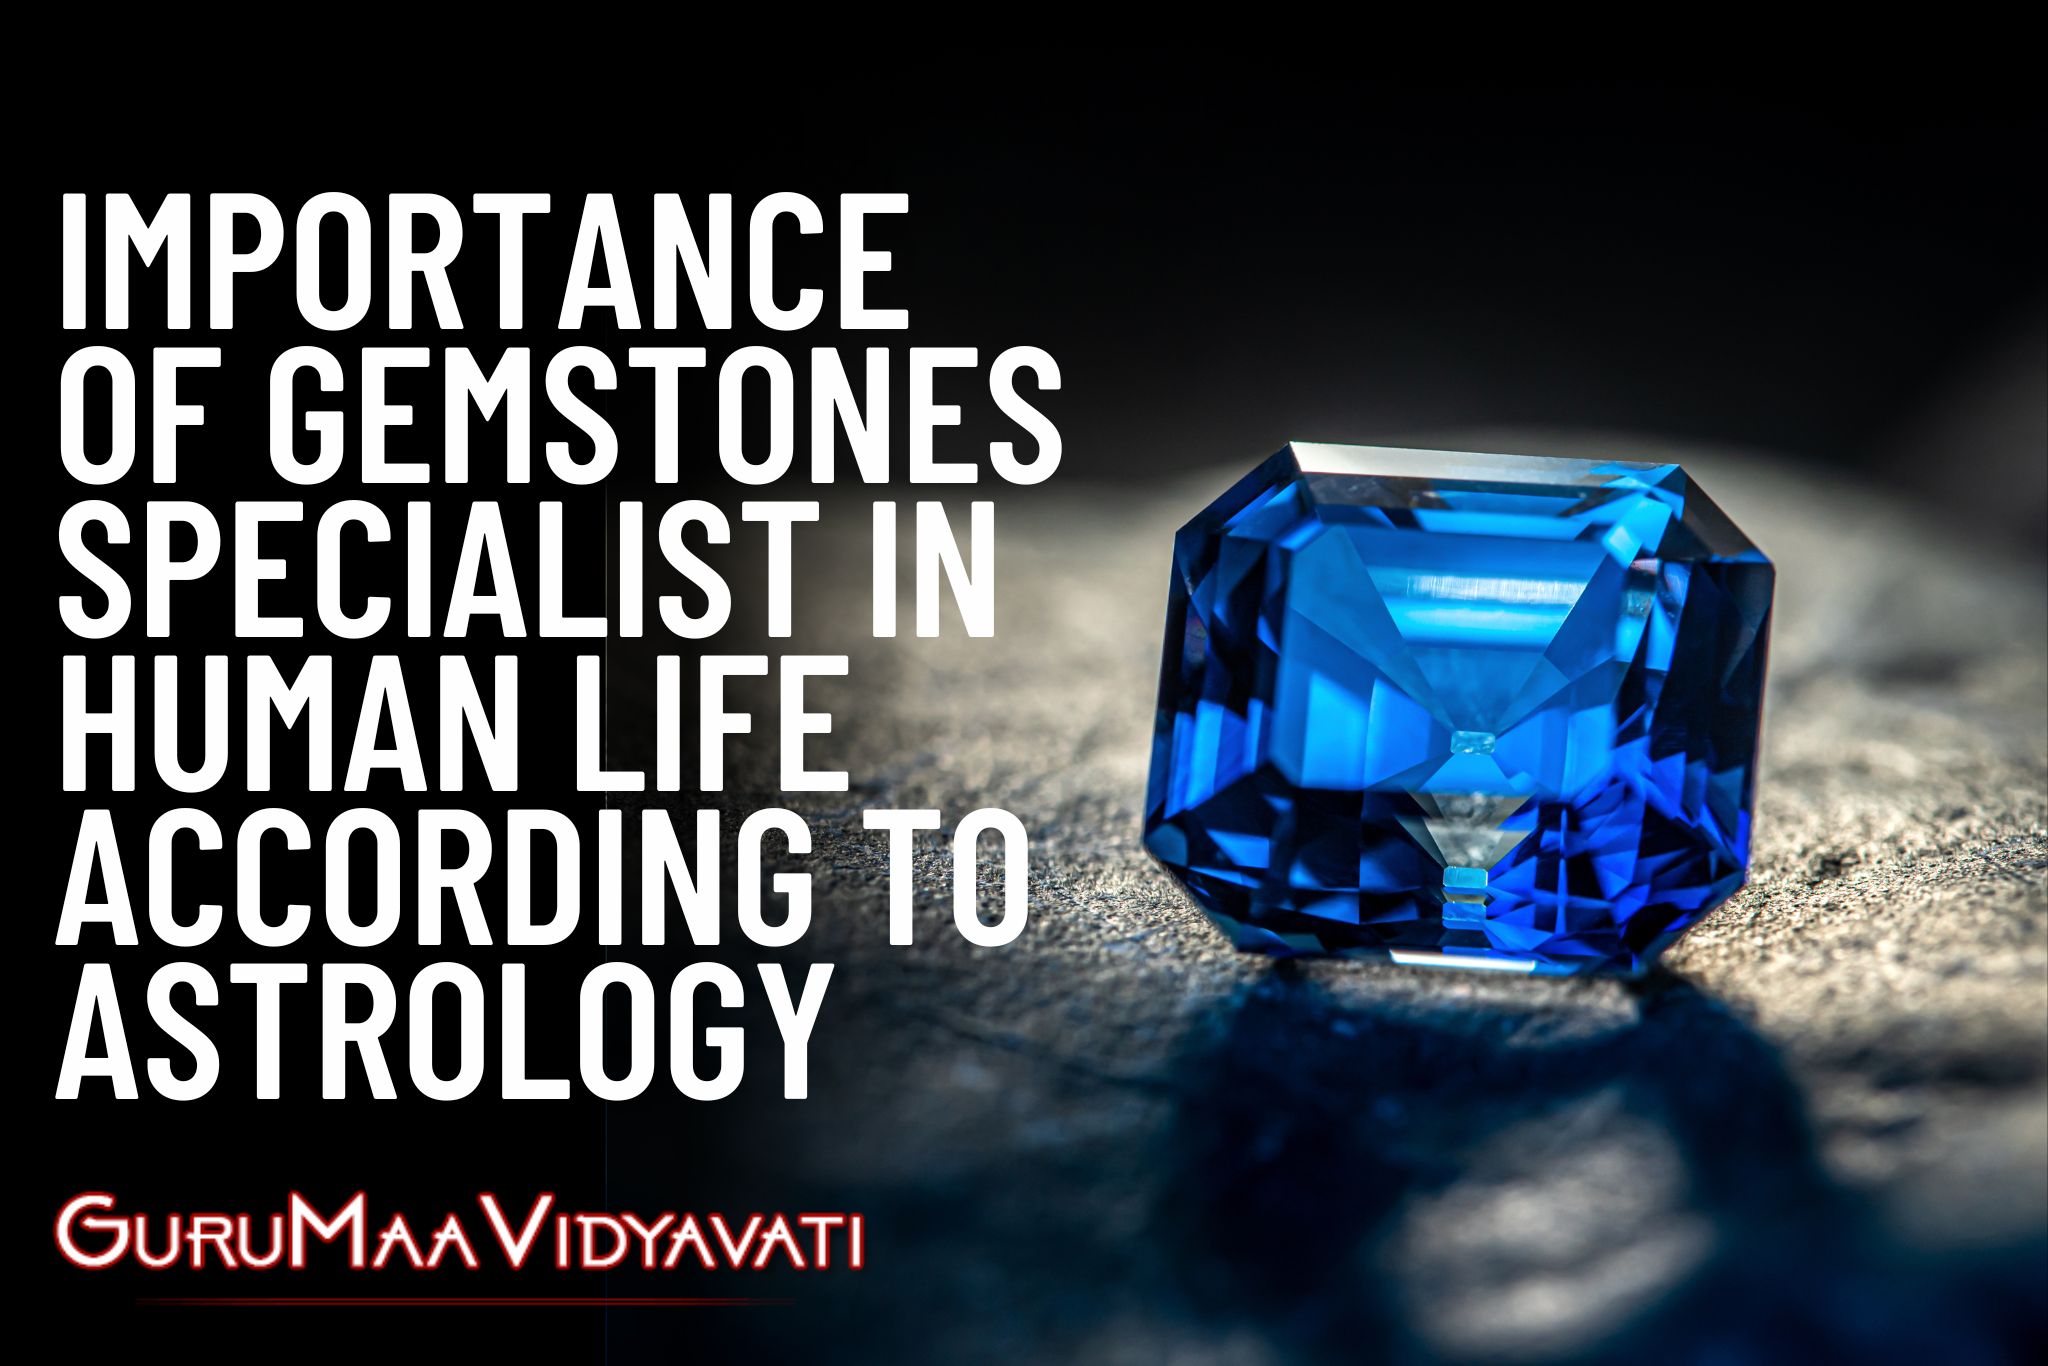 Importance of Gemstones Specialist in Human Life According to Astrology